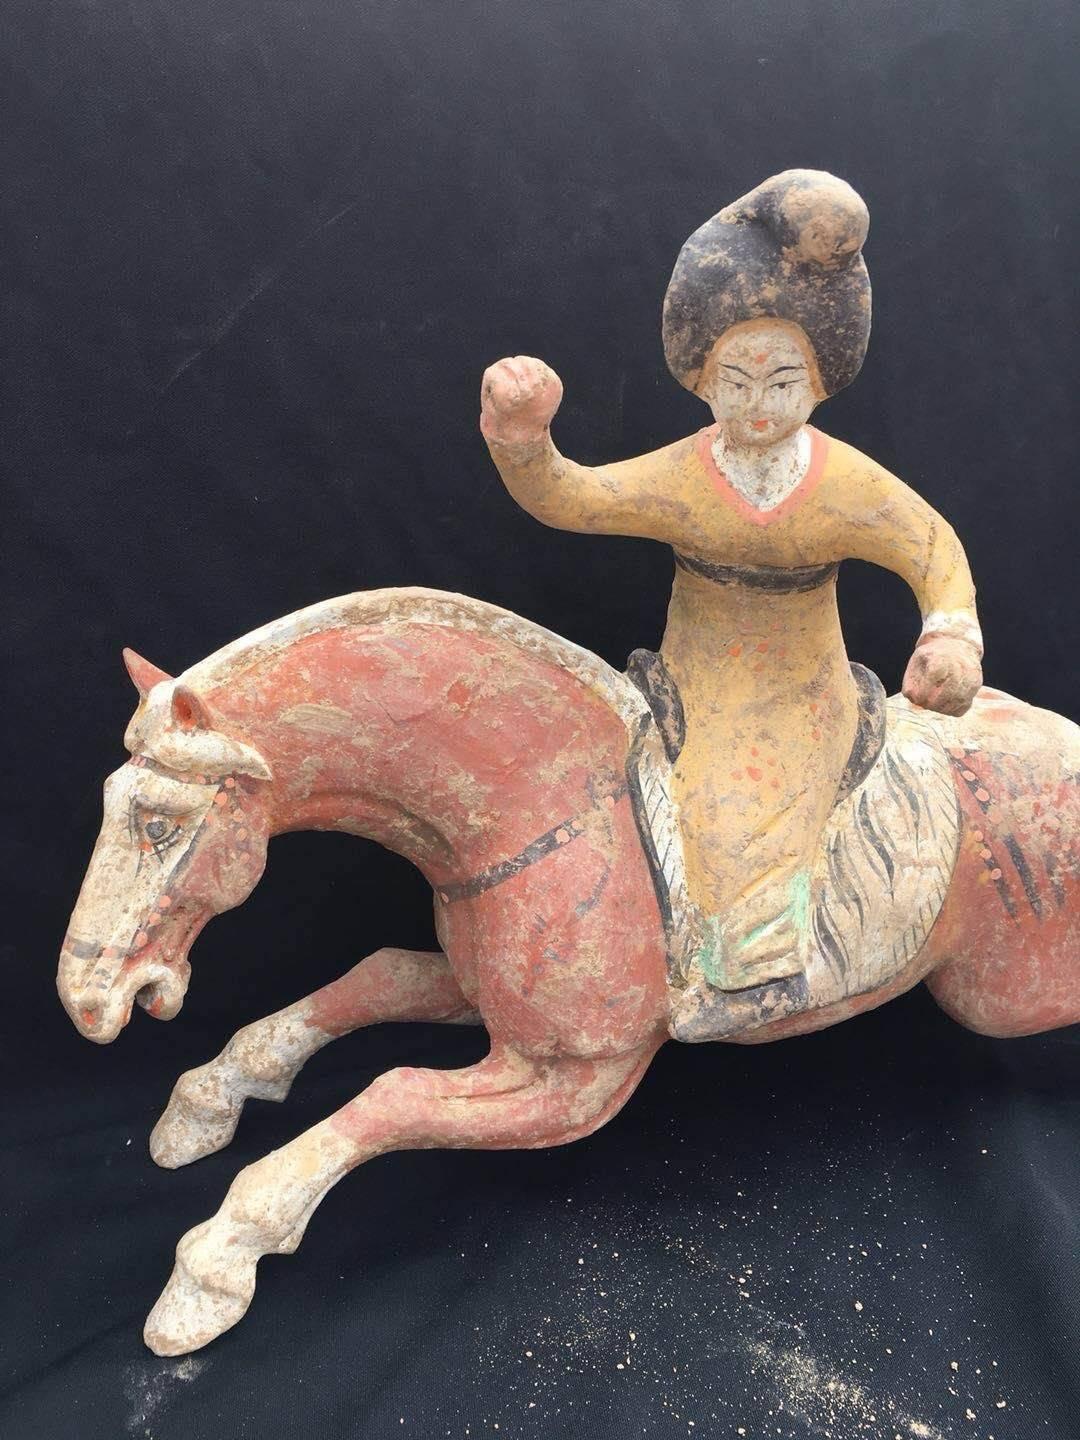 A rare pair of female court ladies playing polo upon tang dynasty horses.
Lively characterization of 8th century craftsmanship.
Measurements: approximate 12” tall x 16” length.
TL tested from Oxford.